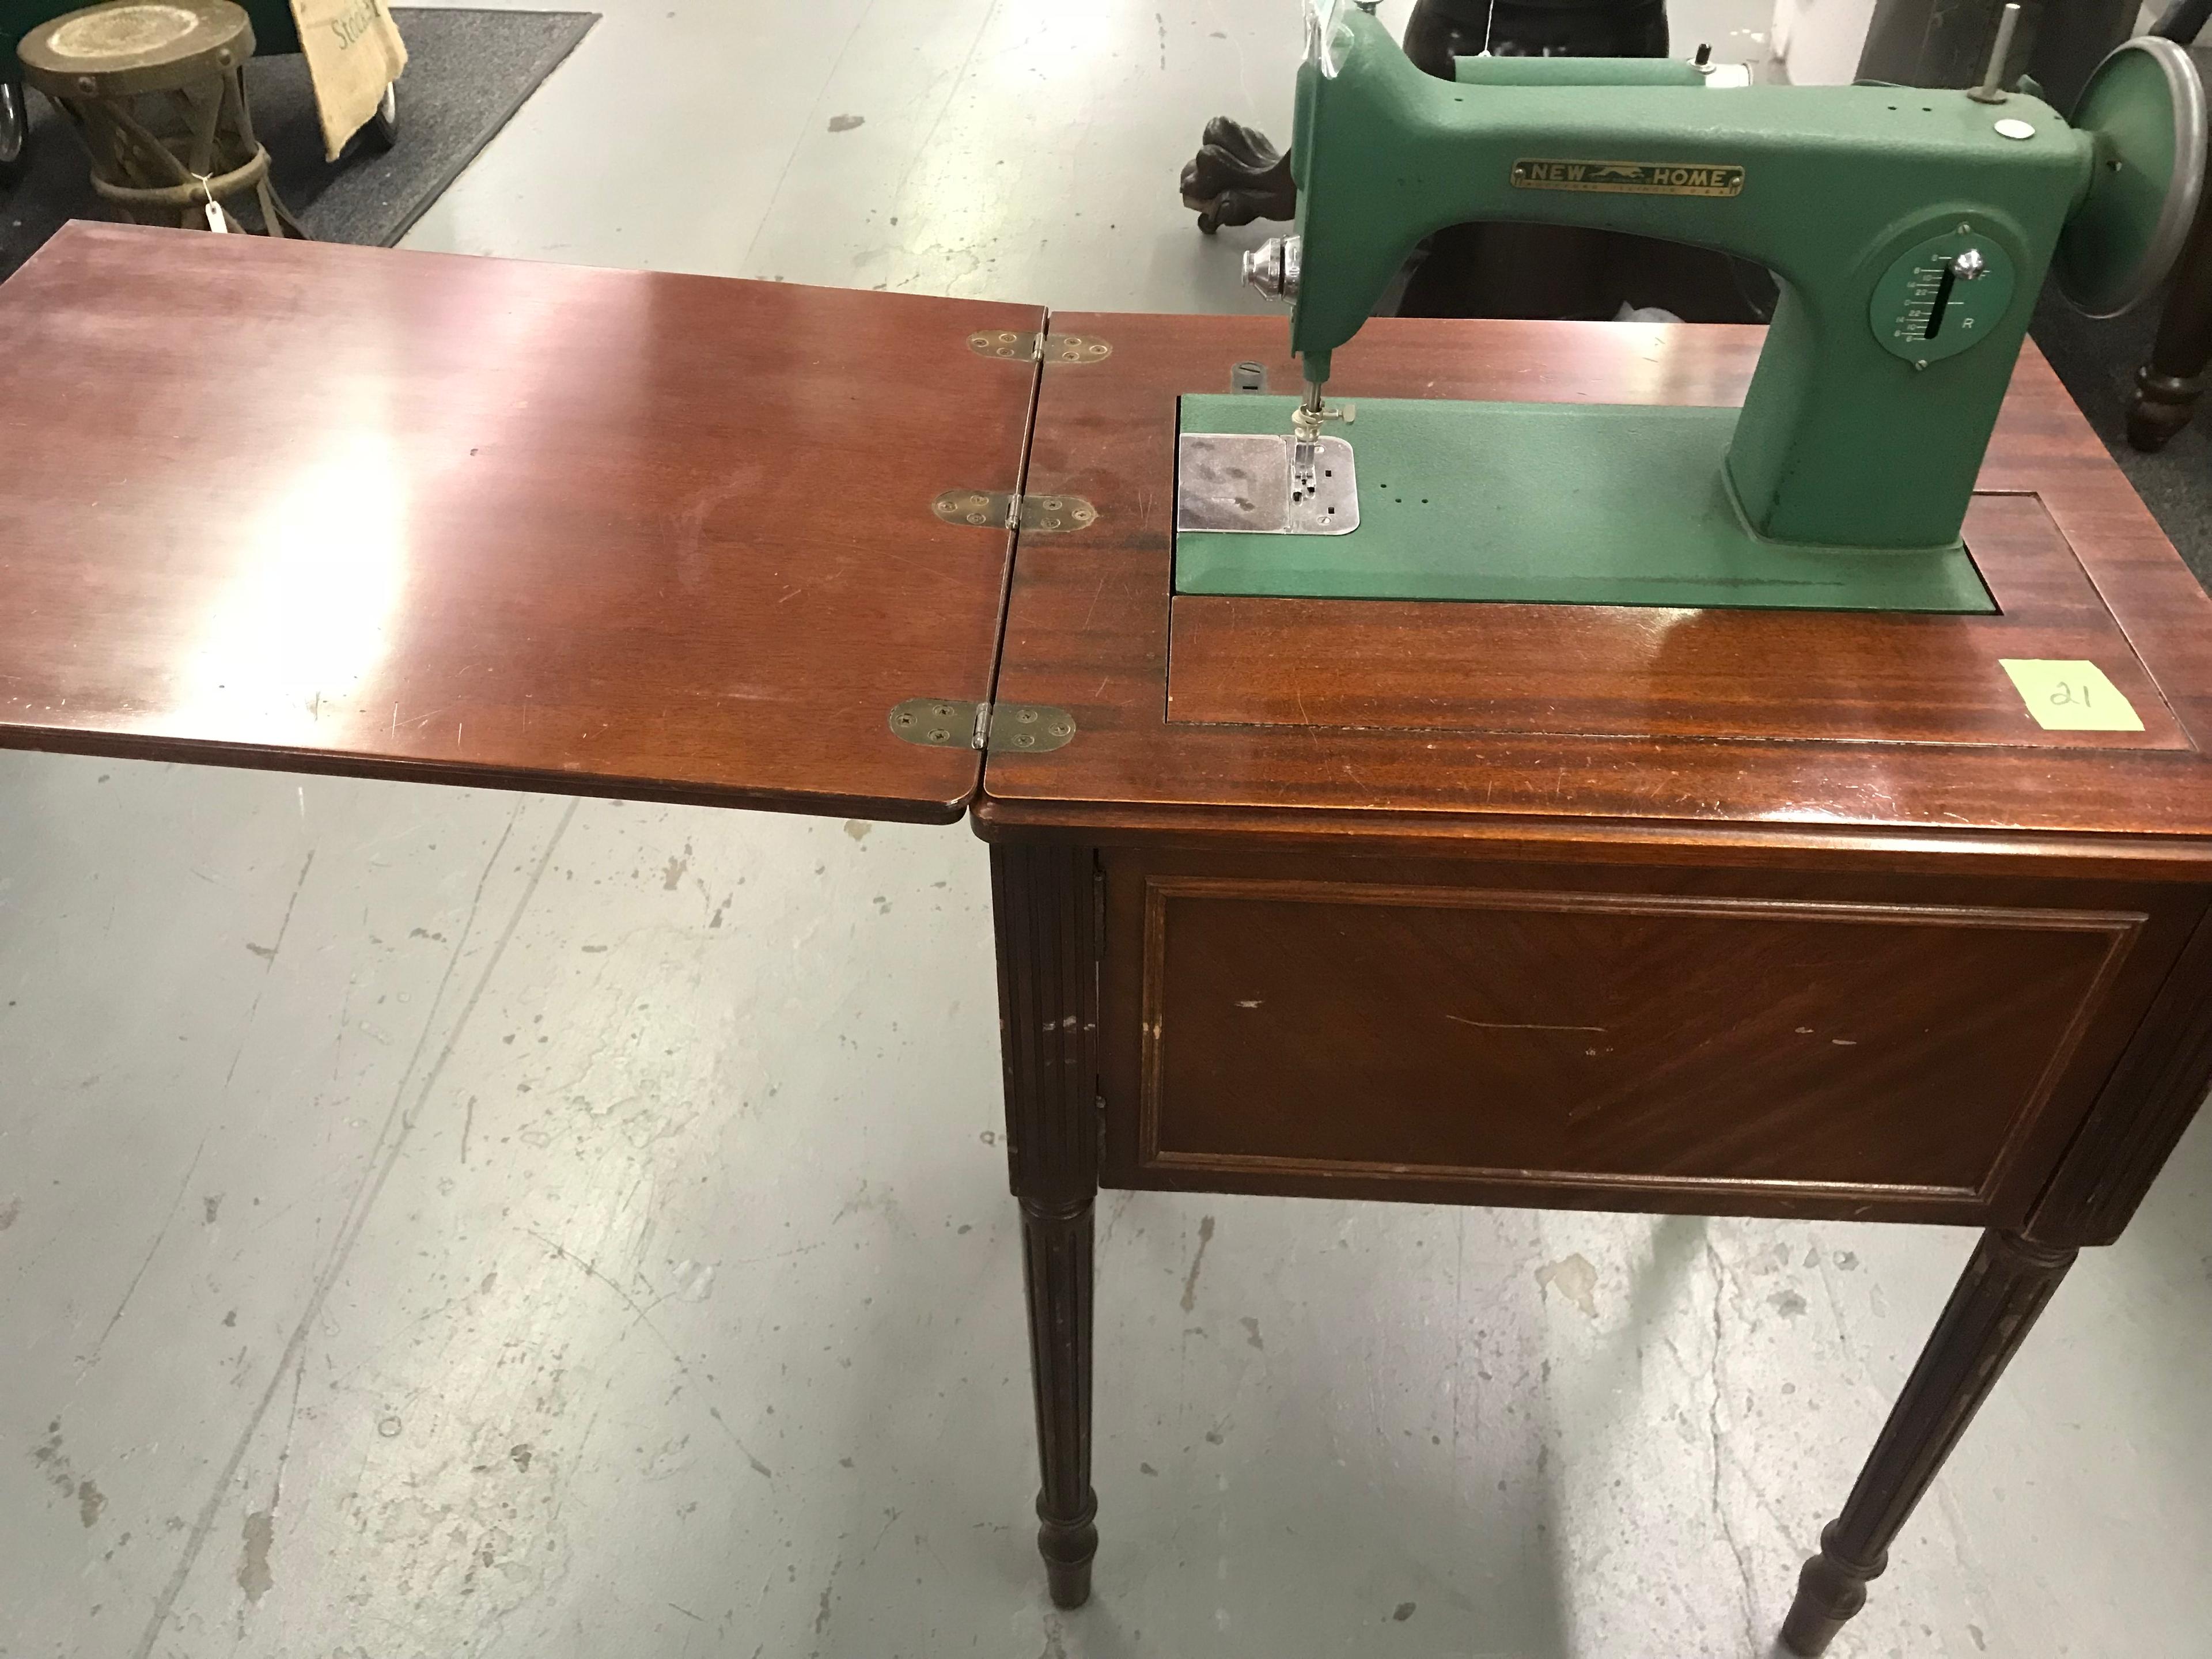 Westinghouse sewing machine